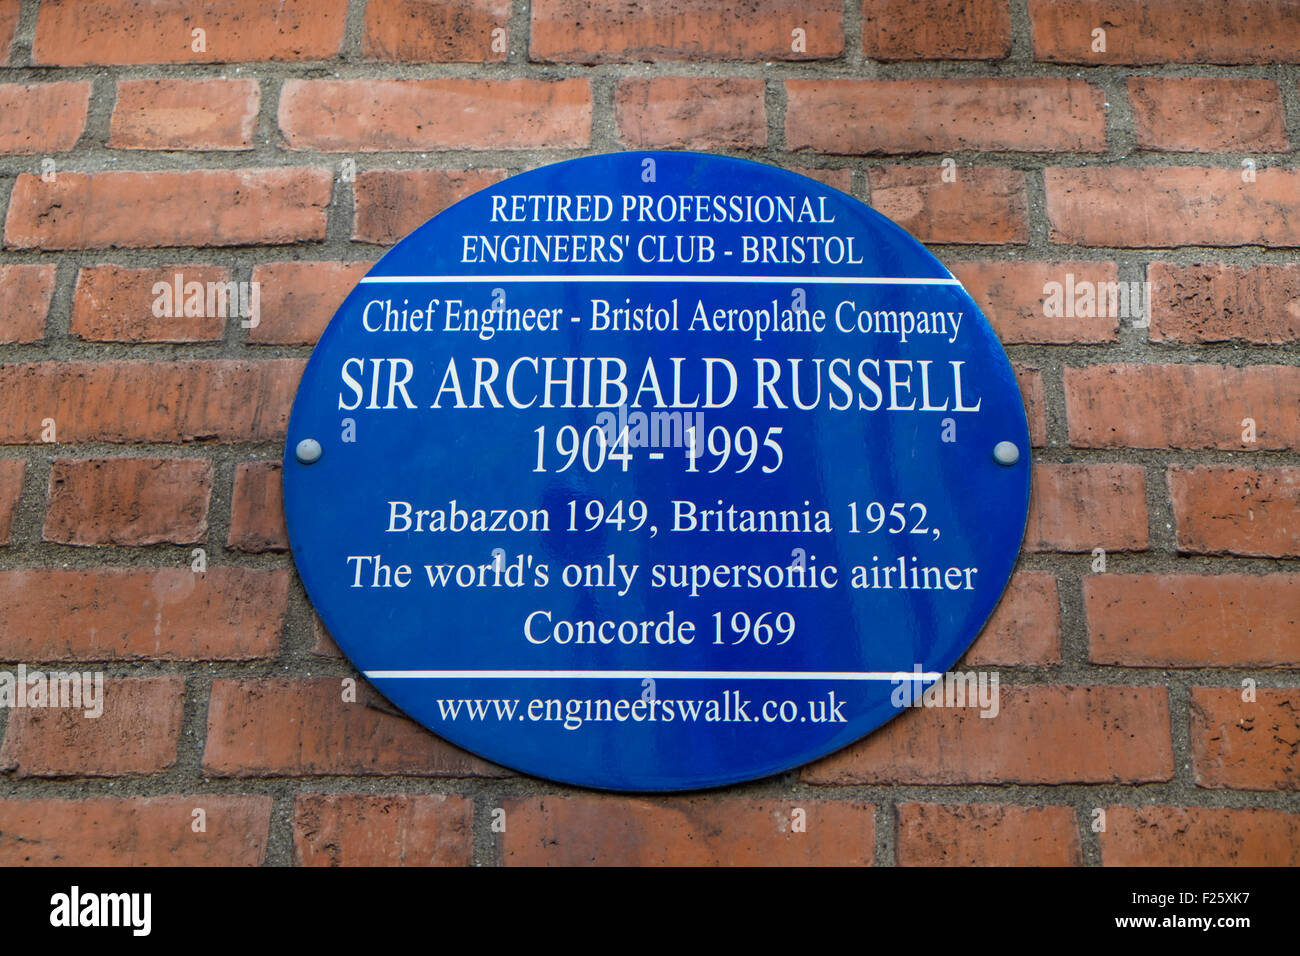 The Engineers Walk Blue Plaques in Bristol  Sir Archibald Russell Stock Photo